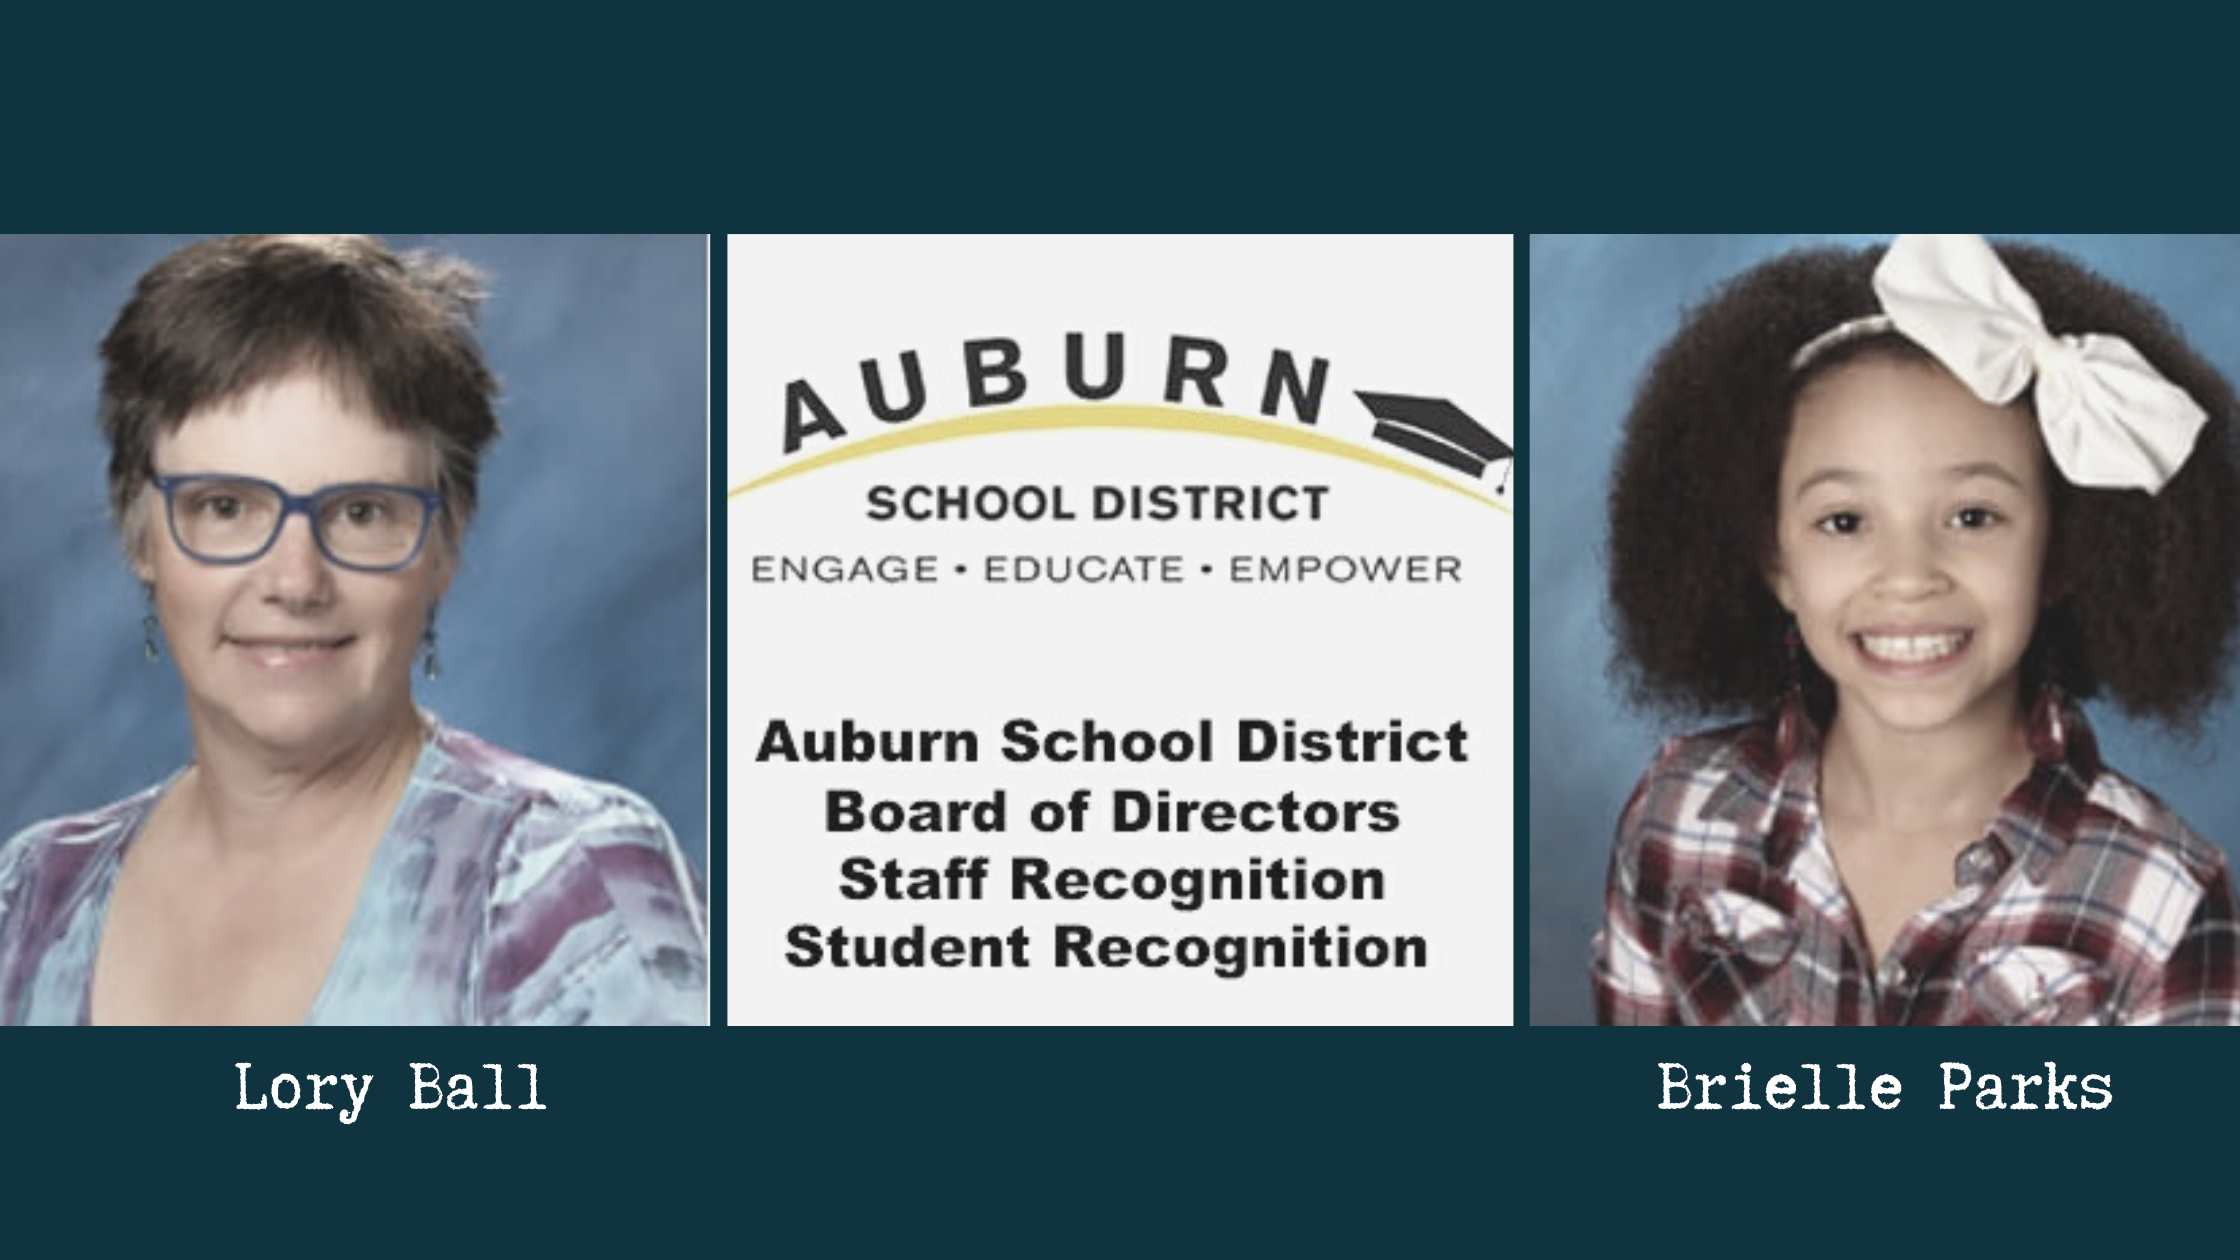 ASD, Brielle Parks, Brielle Parks evergreen heights, auburn wa Brielle Parks, Brielle Parks student of the month,Student of the month 2020, november student of the month, asd, auburn school district,asd board of directors, staff member of the month 2020, november staff member of the month, asd, auburn school district, lory ball, lory ball auburn school district, lory ball auburn high school